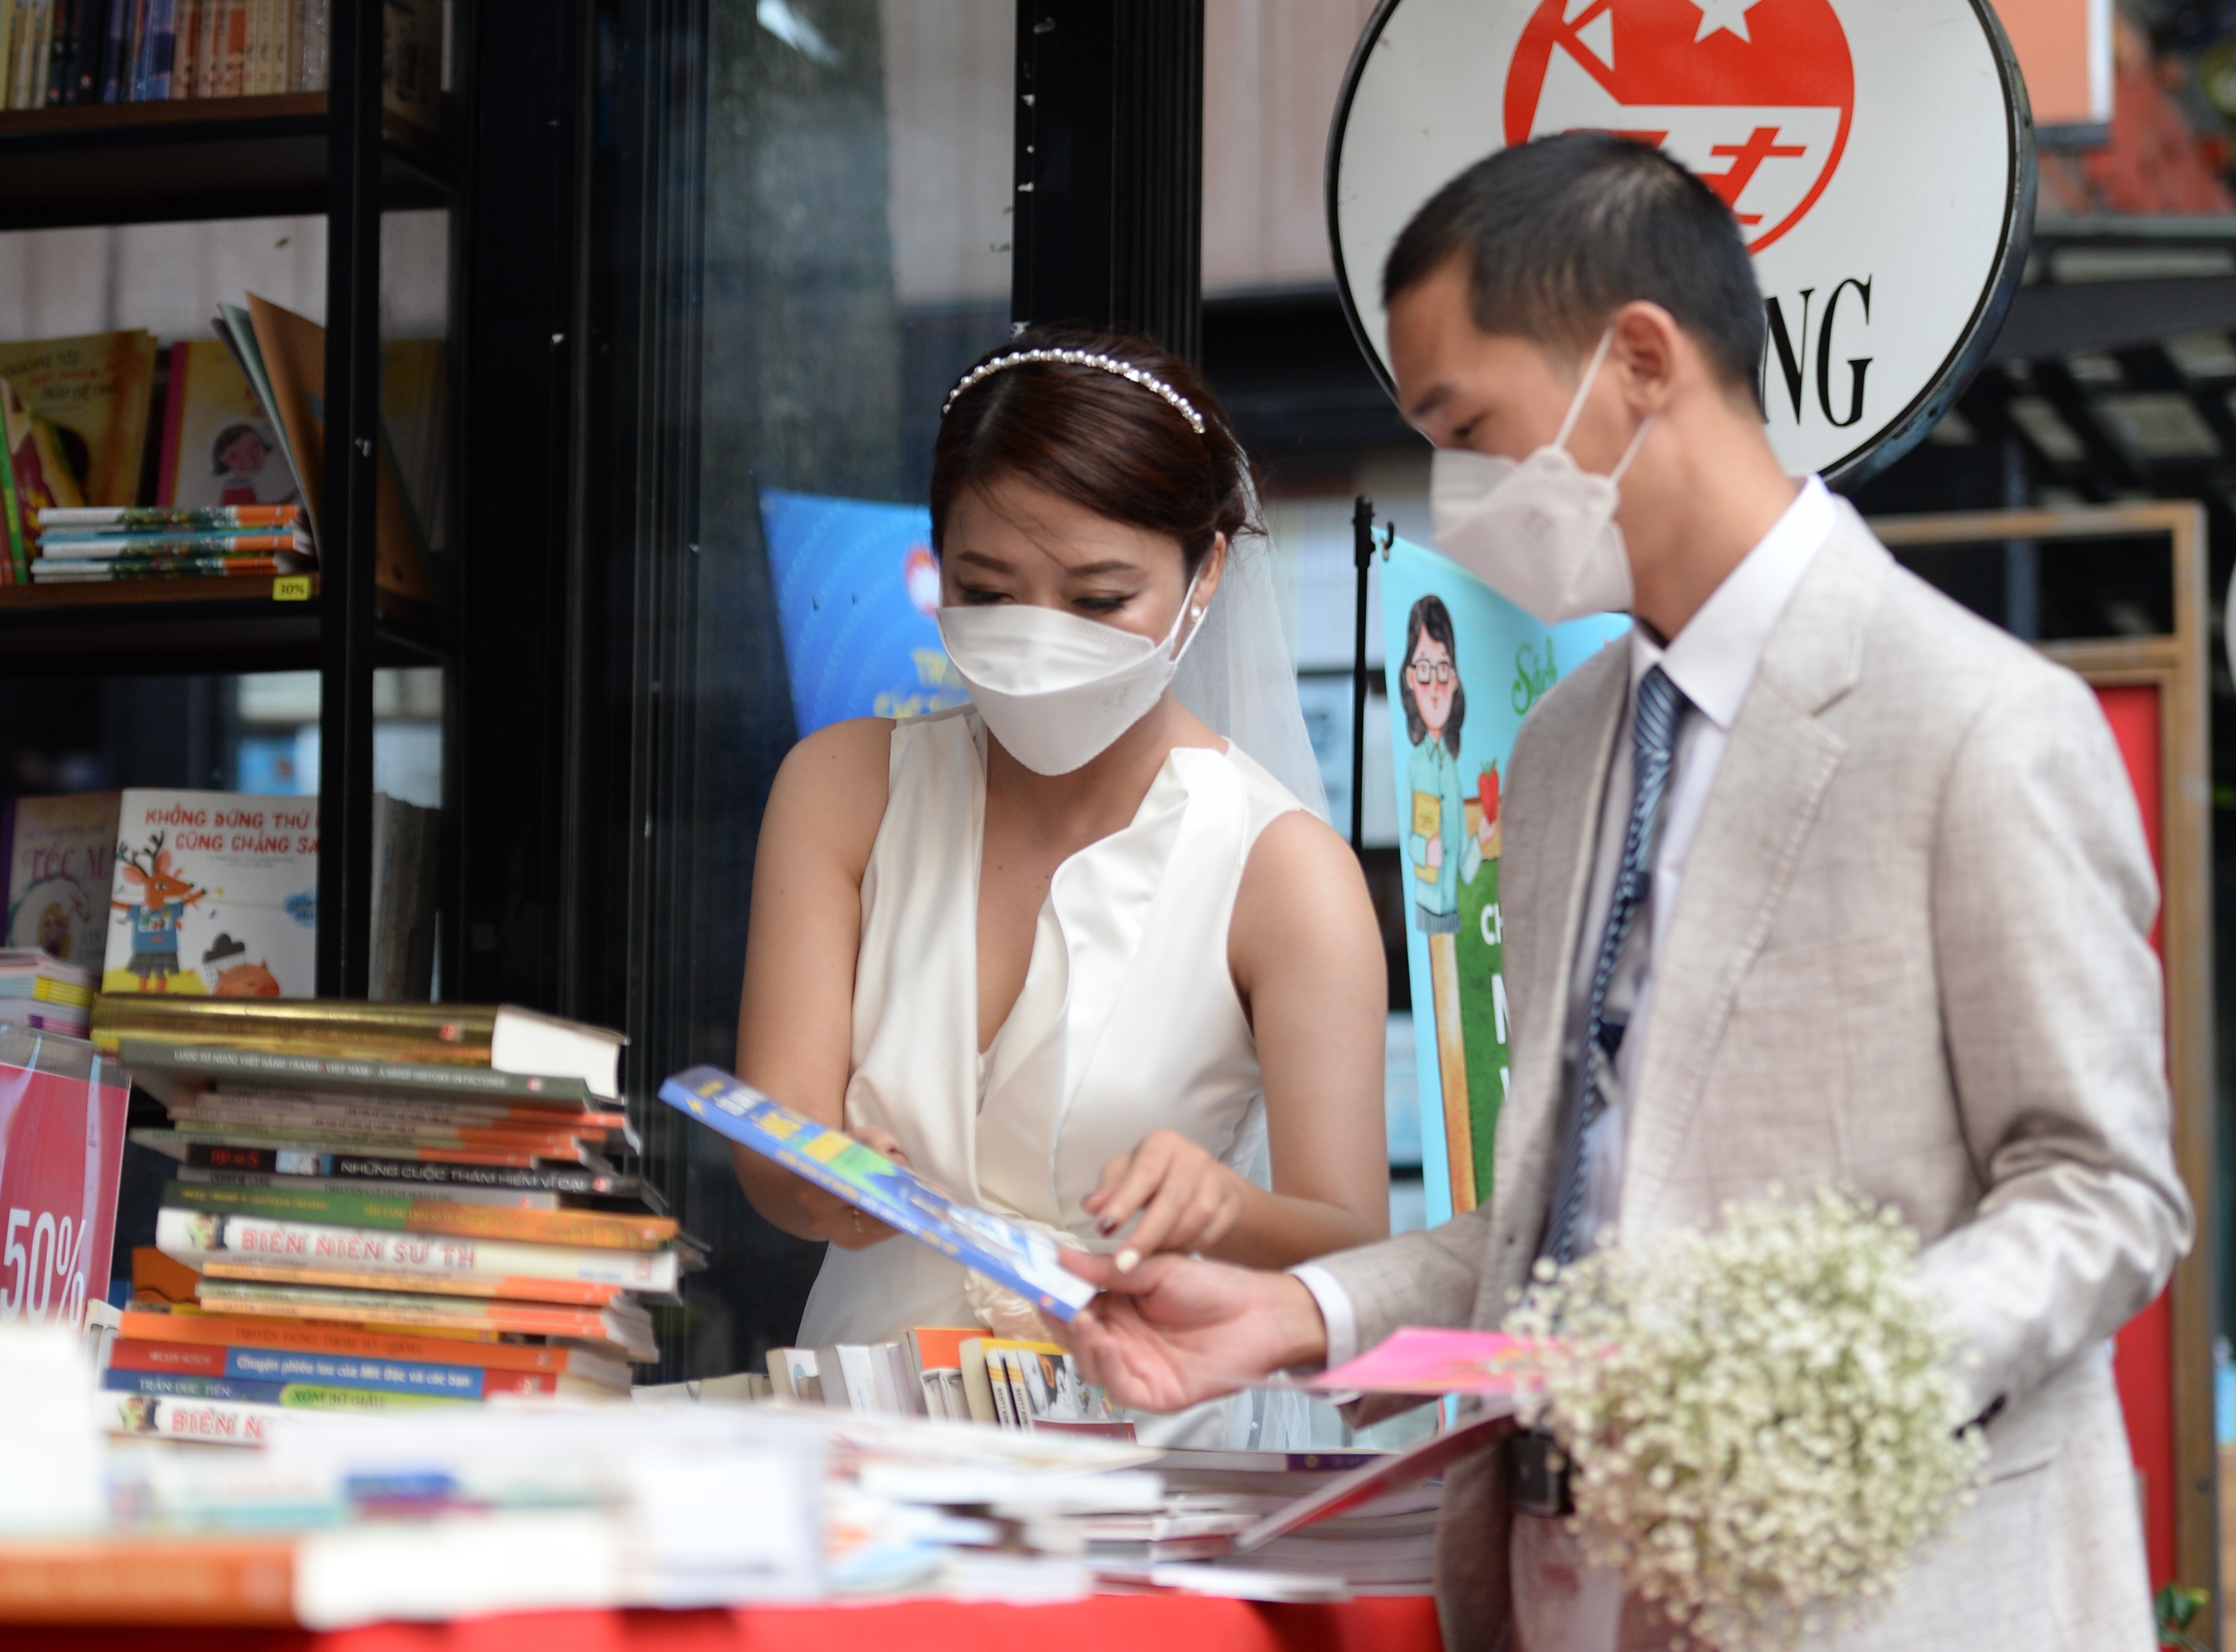 Tu Anh and Mai Mai buy new books during their wedding party at the Ho Chi Minh City Book Street, November 21, 2021. Photo: Tu Trung / Tuoi Tre